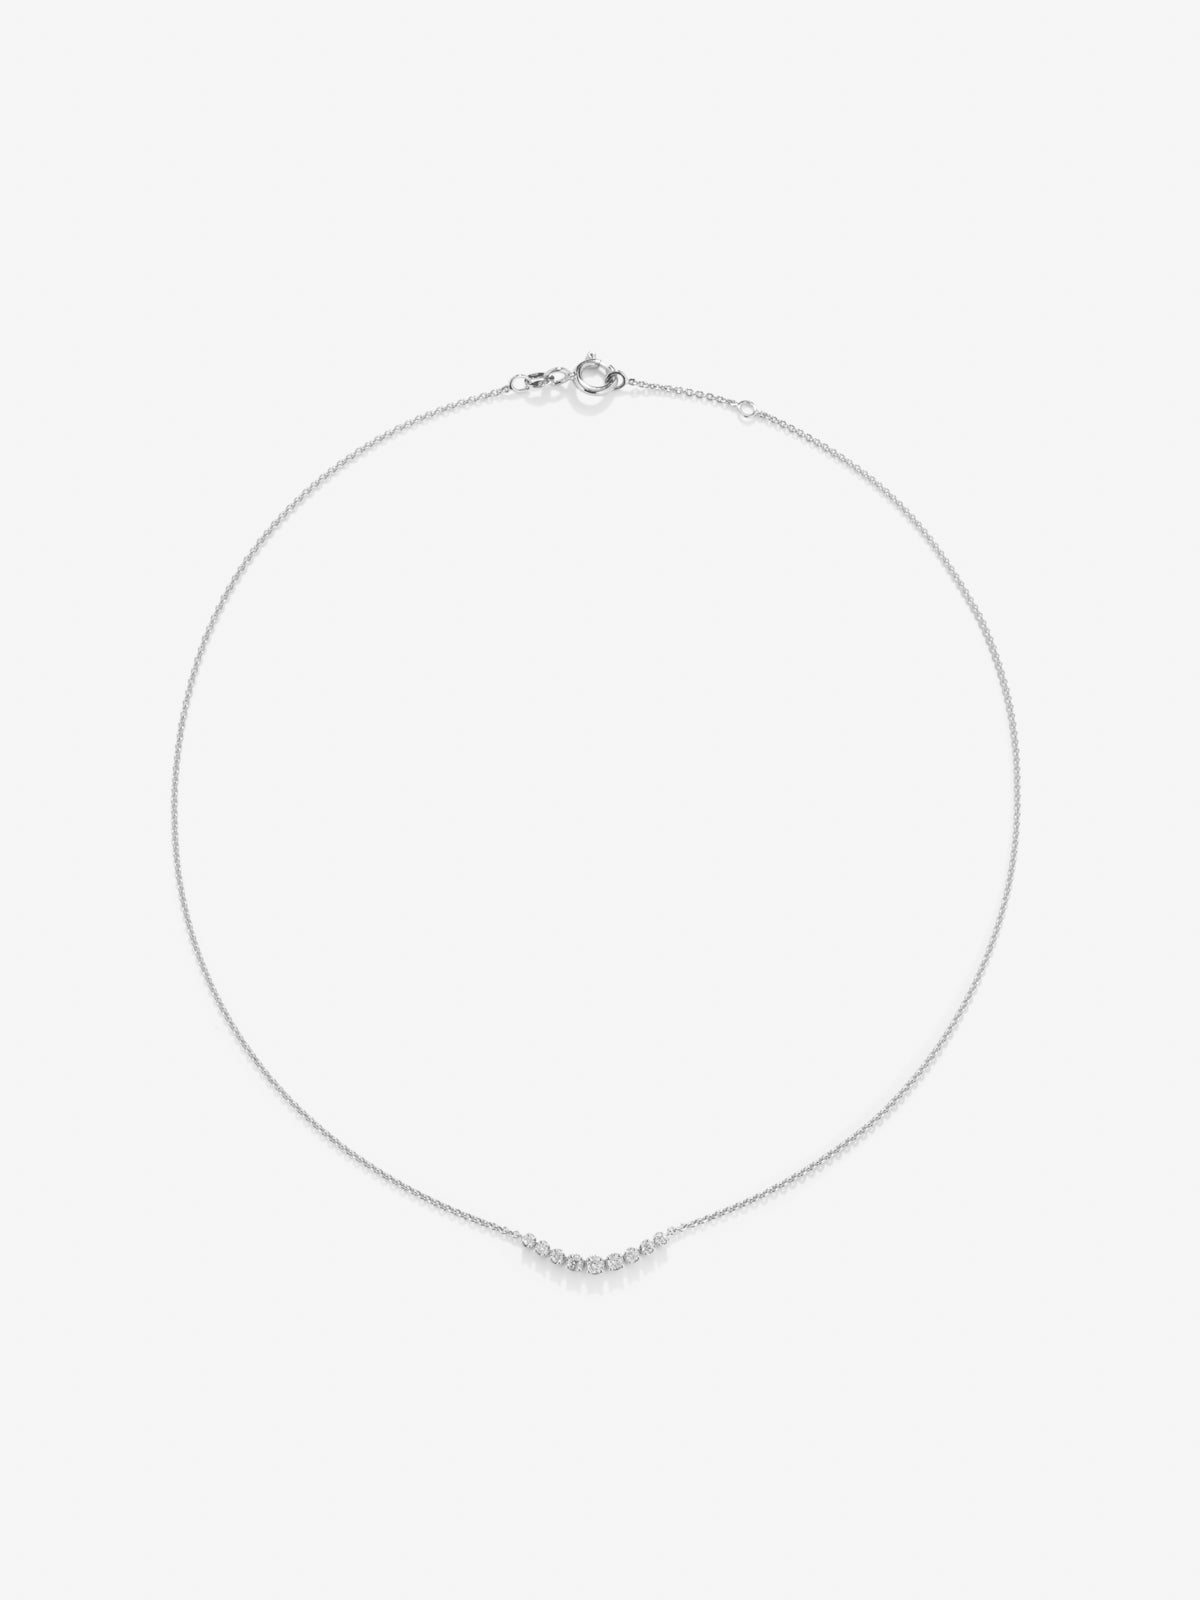 18K white gold necklace with 9 brilliant-cut diamonds with a total of 0.26 cts